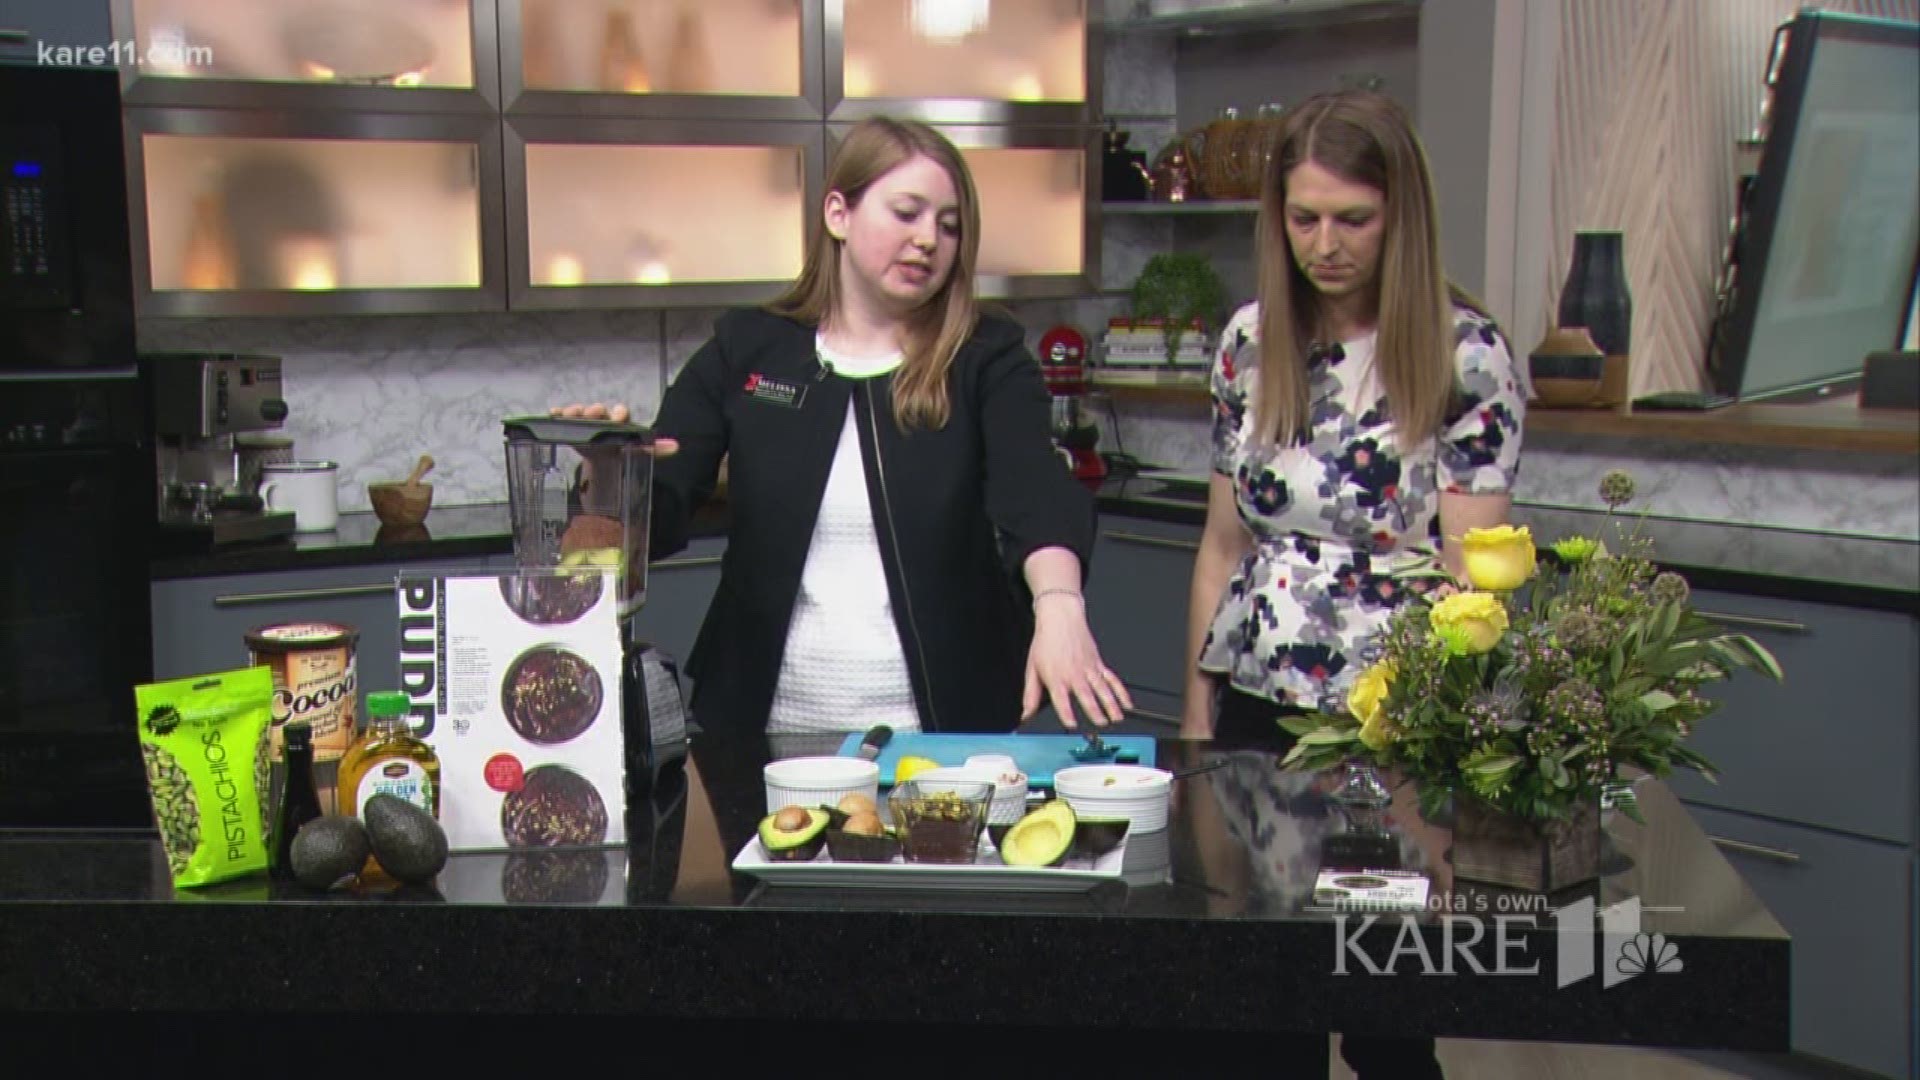 Registered dietitian from Hy-Vee, Melissa Bradley shares a healthy chocolate mousse recipe with a secret ingredient.